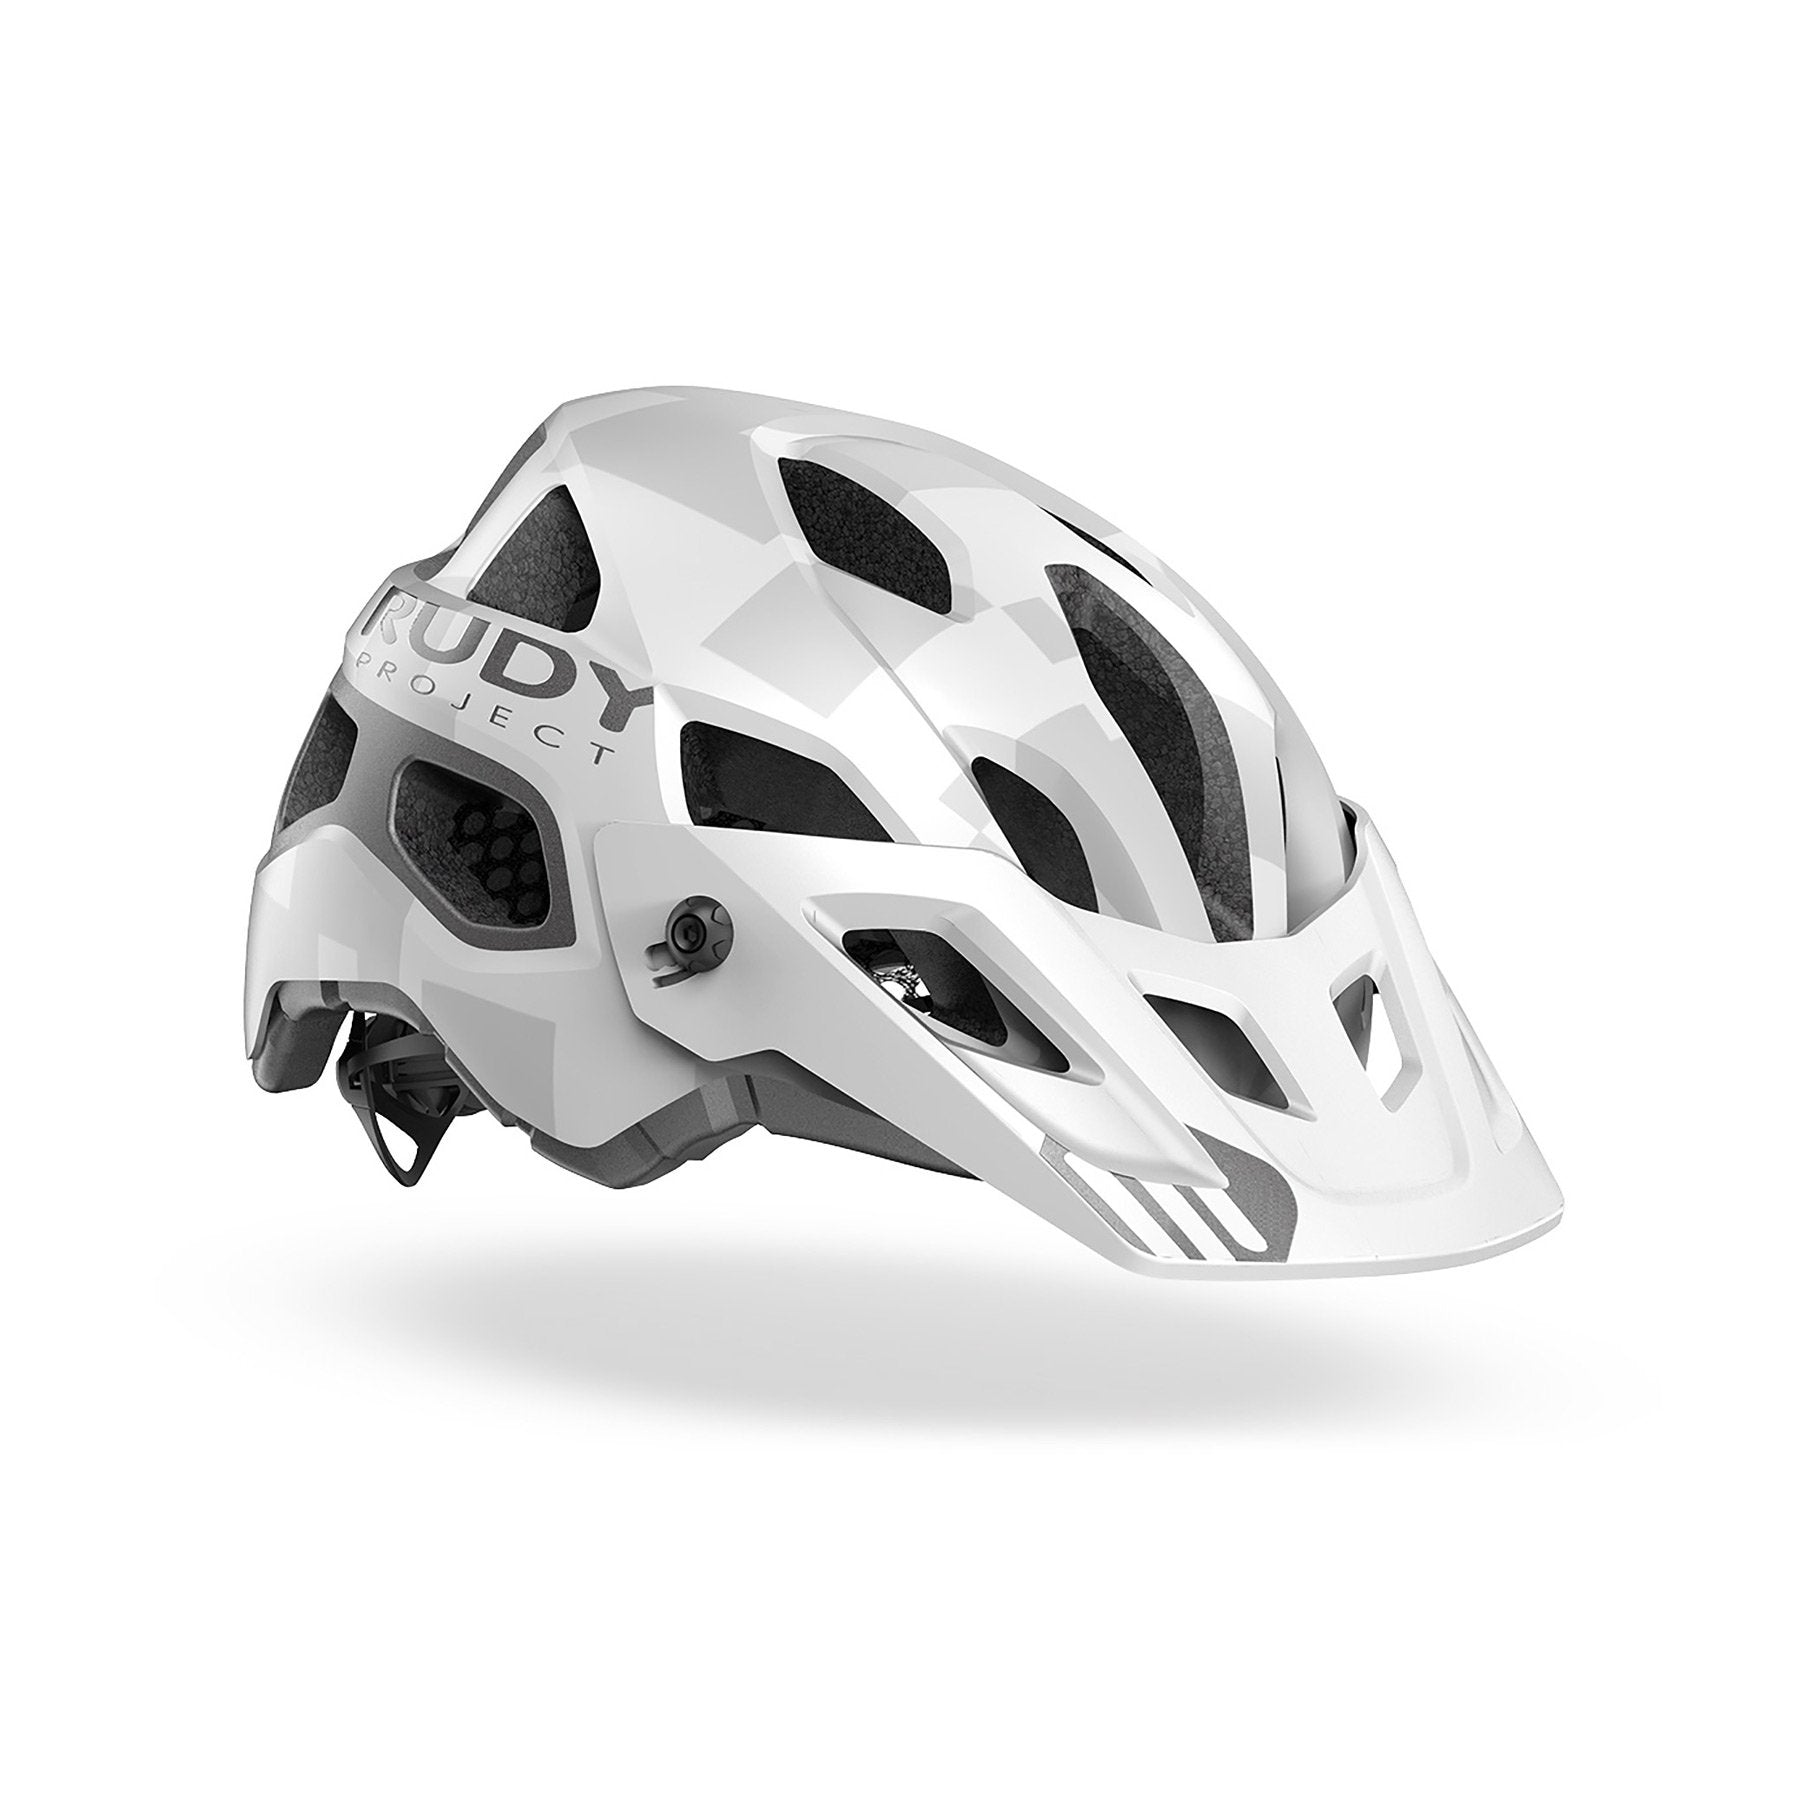 Rudy Project Protera+ Bike Helmets Highest Level of Protection